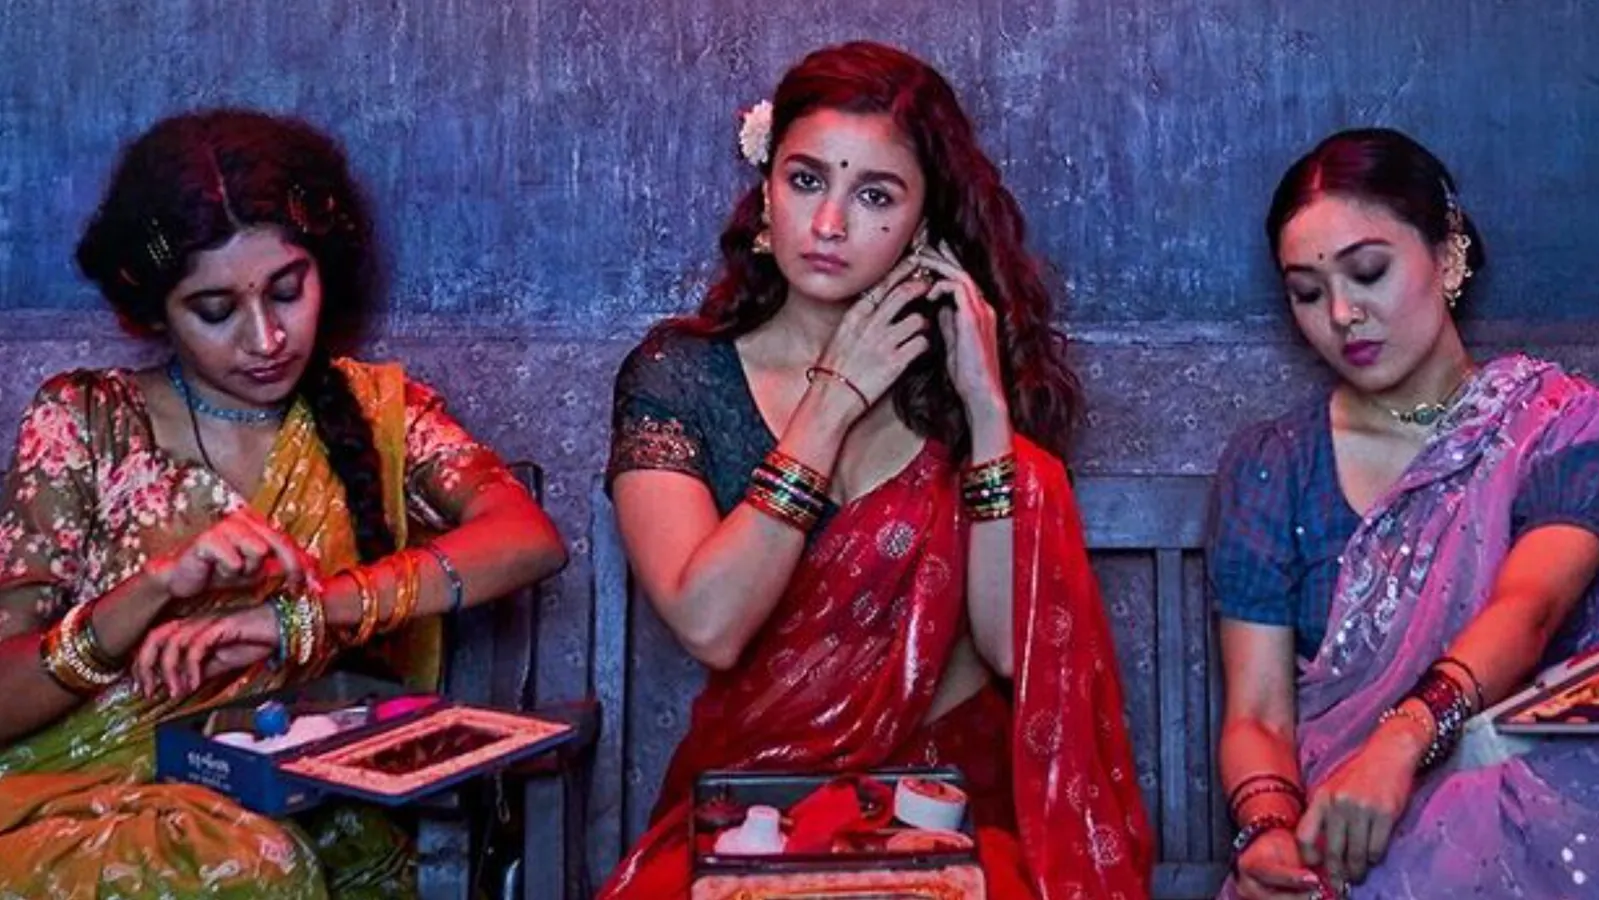 Gangubai Kathiawadi movie review: Alia Bhatt is impressive in this tale of pain and rage turned into victory